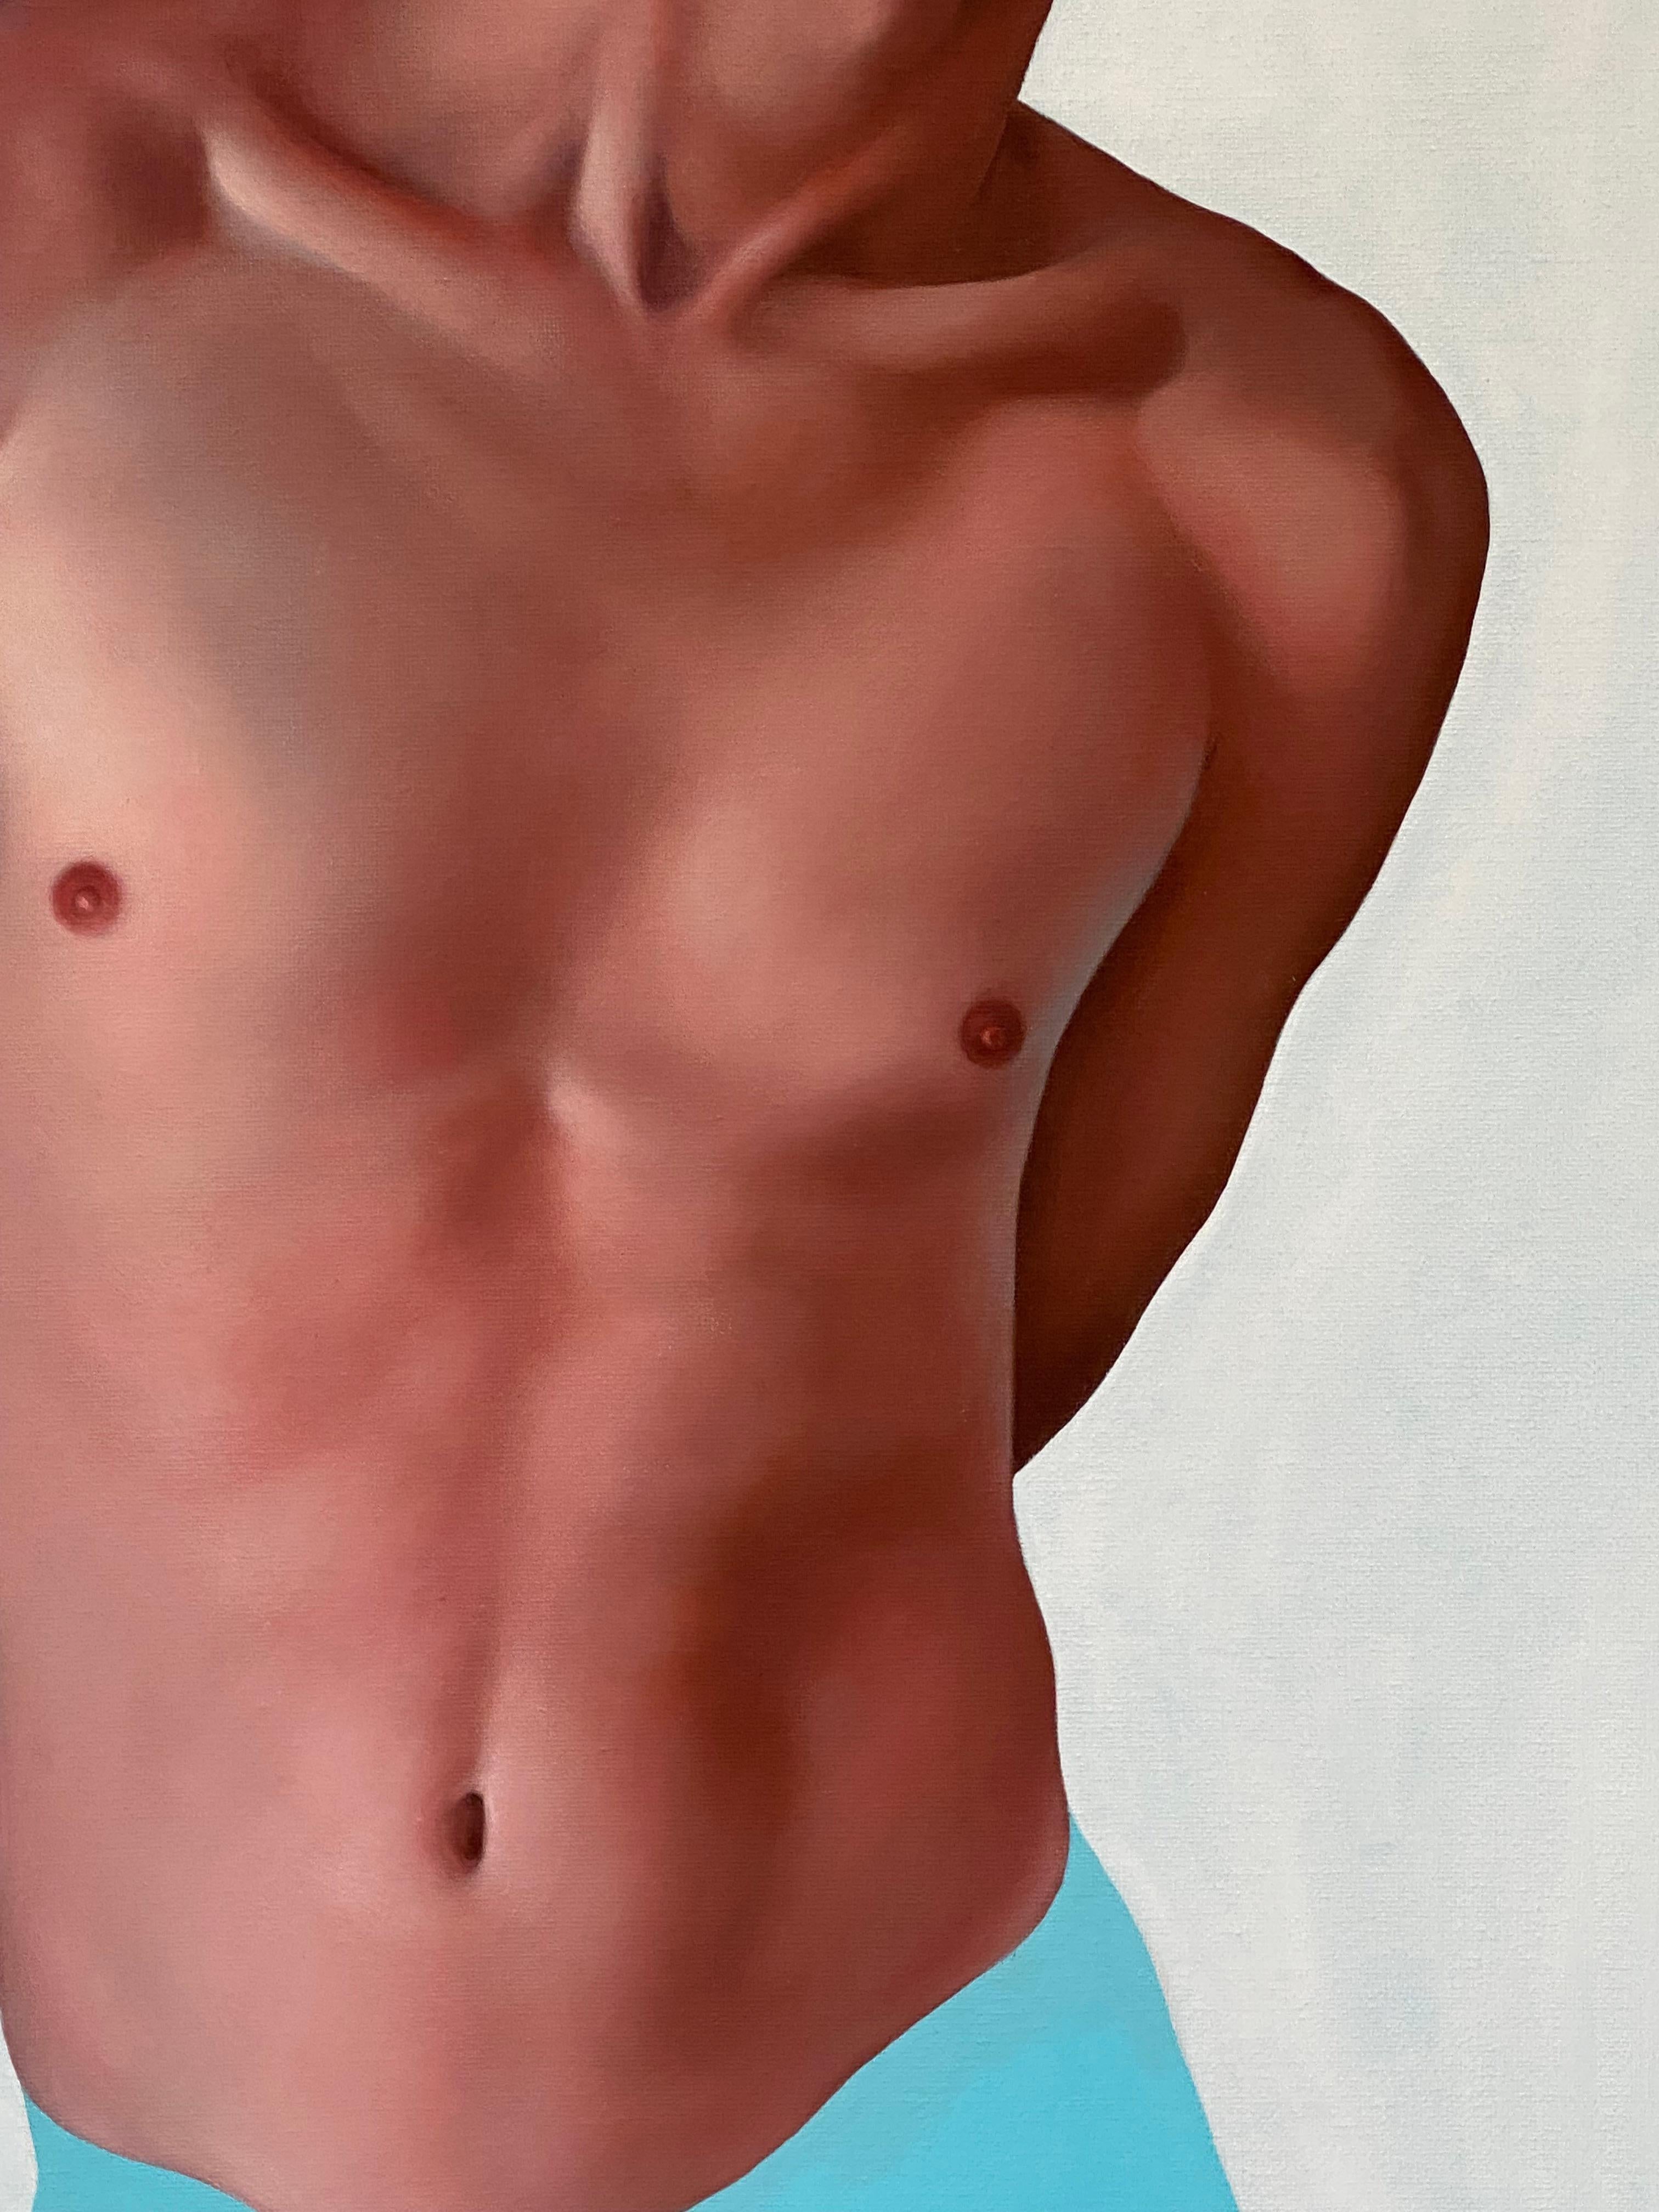 Blue Boy- 21 Century Contemporary Modern Painting of a Young Nude Boy 2